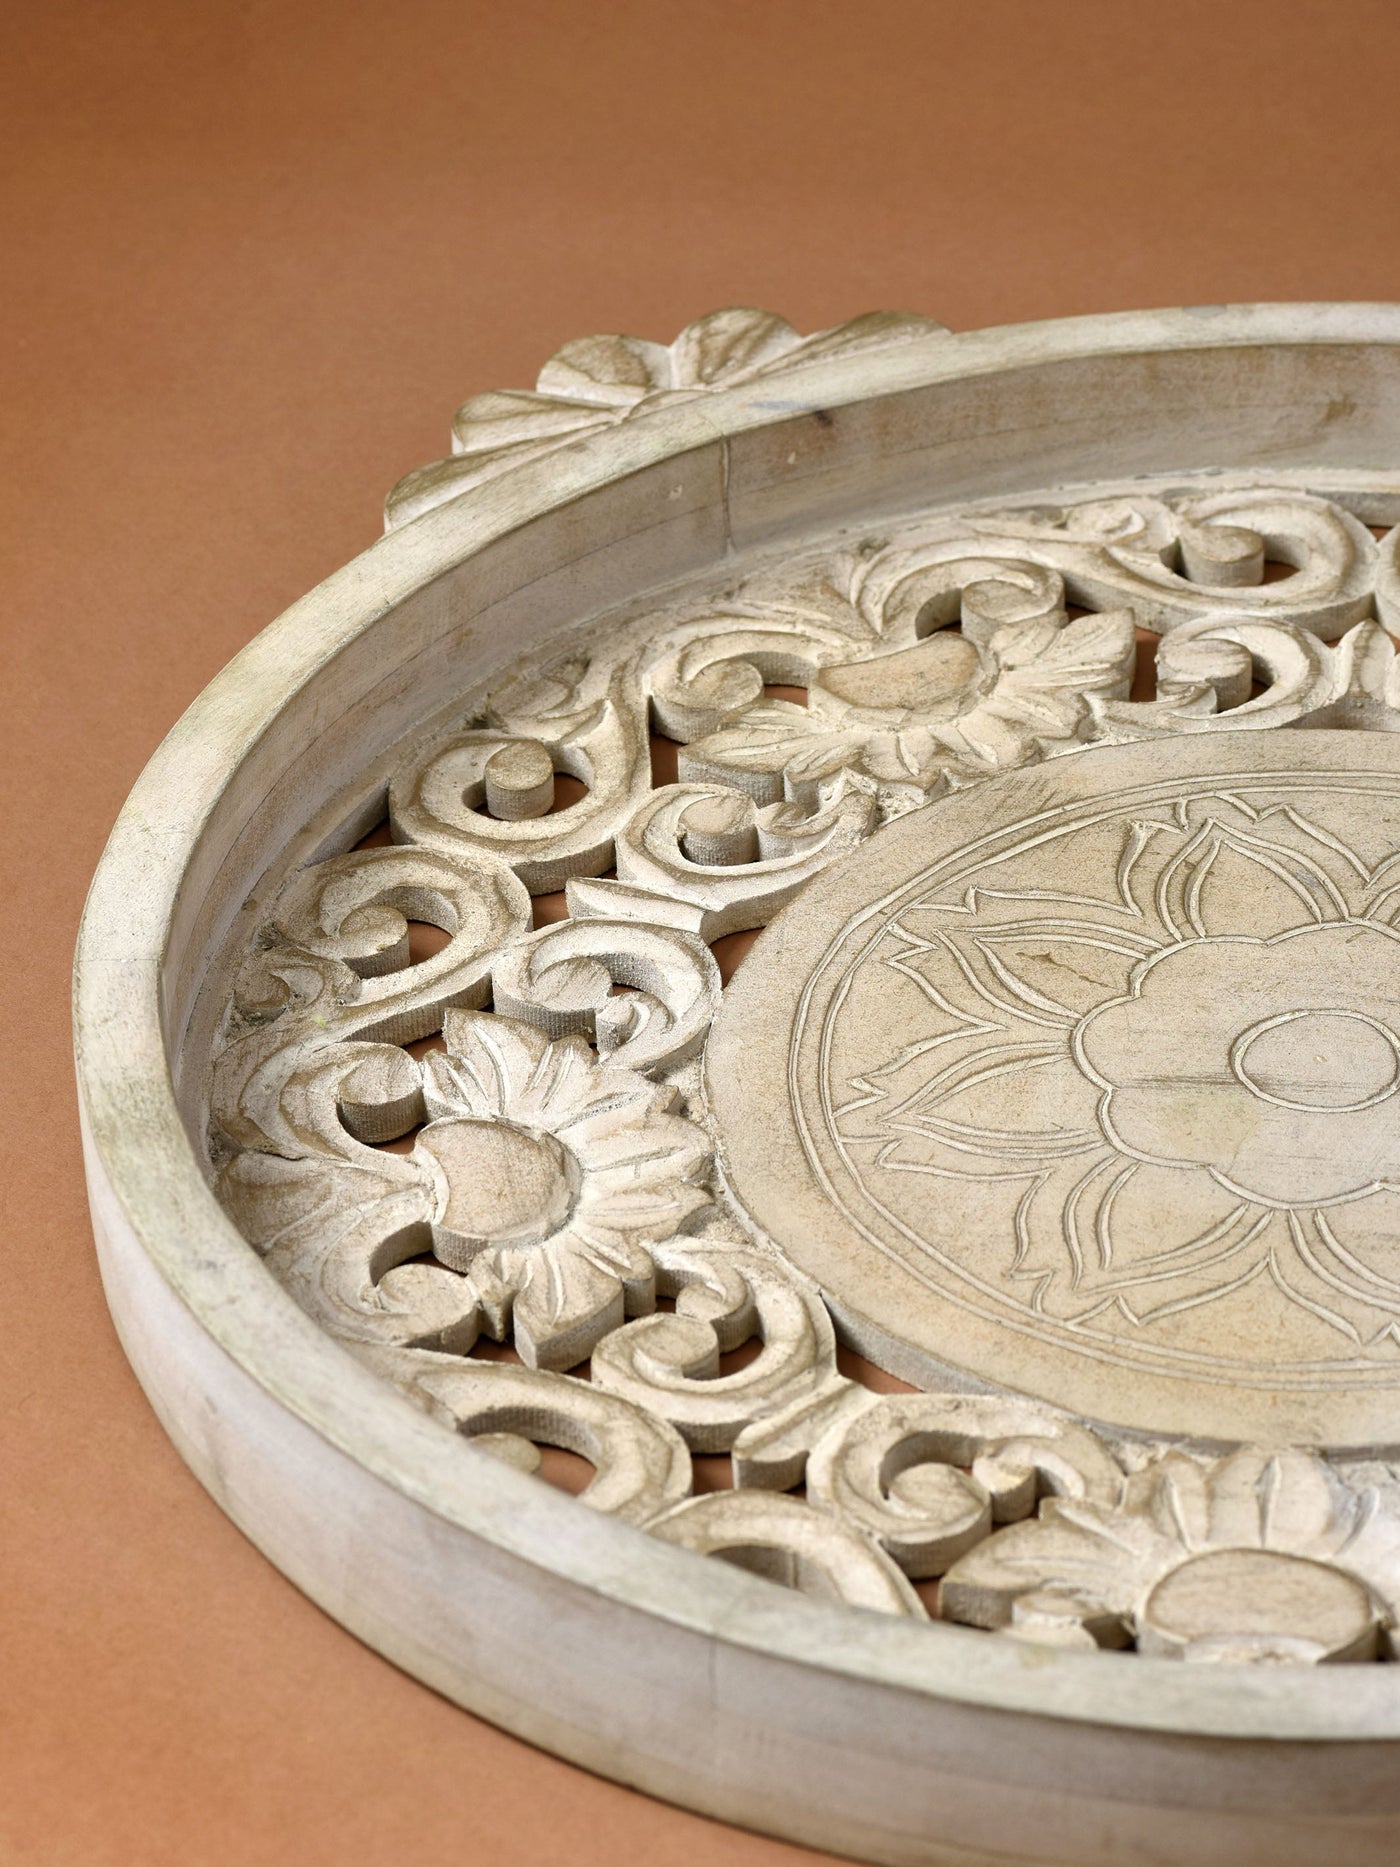 Mangifera Floral Carved Tray